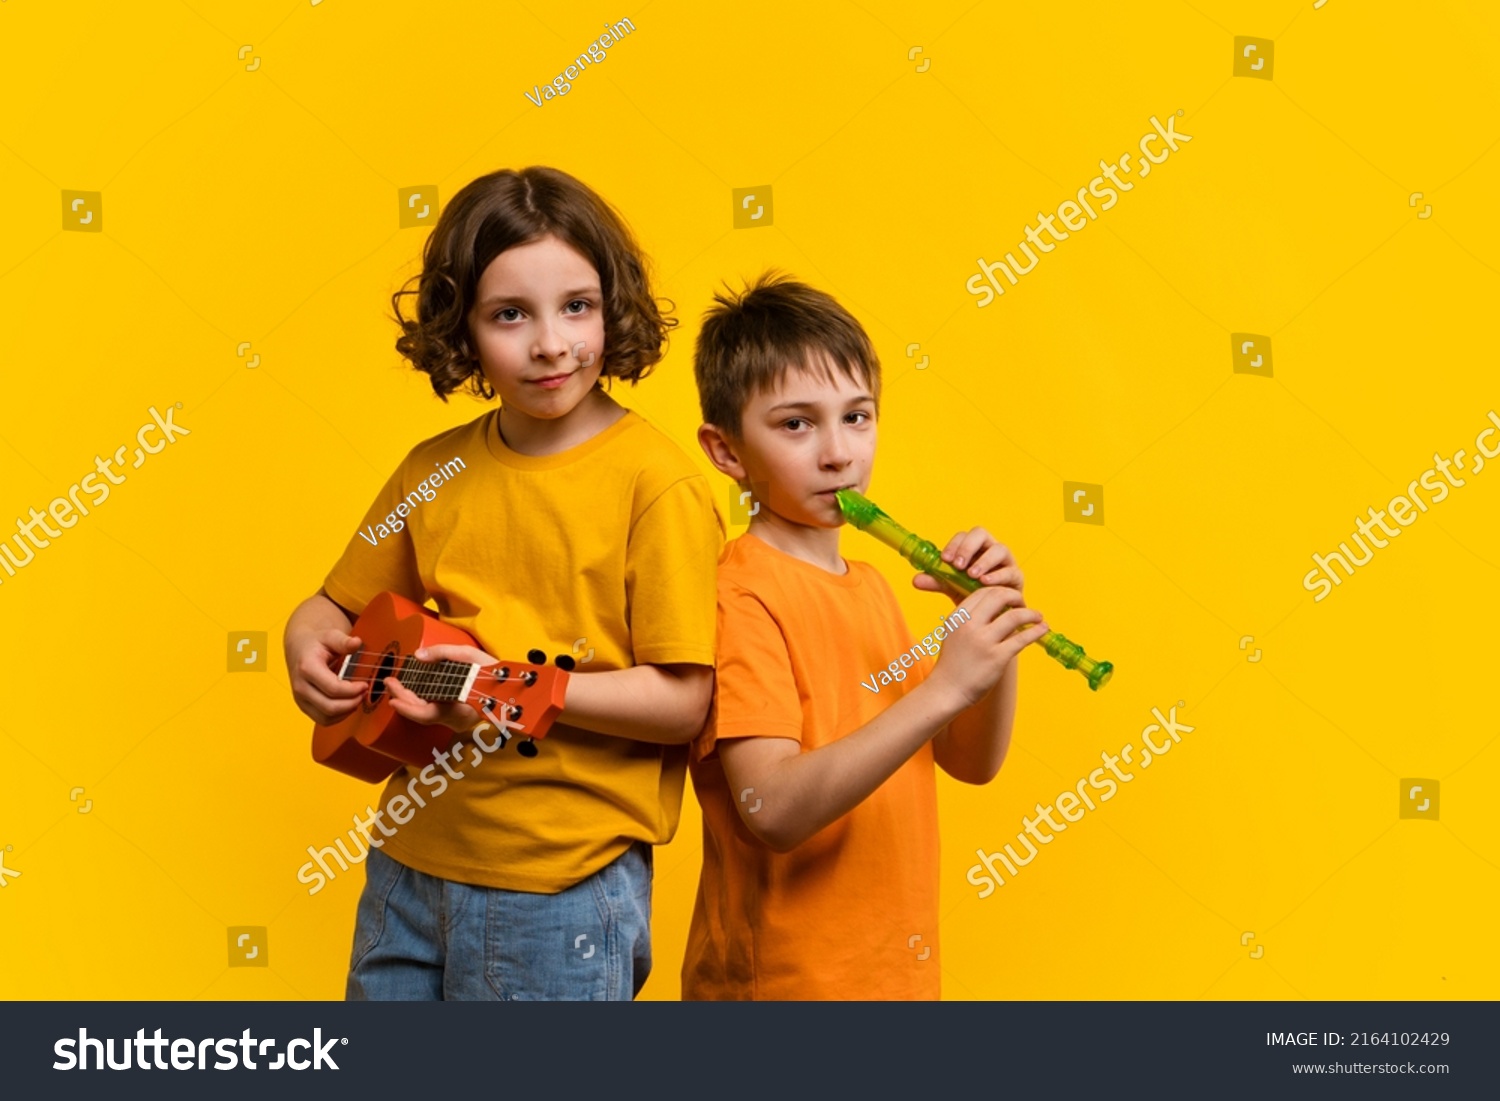 Musical duet in studio on yellow background. Child girl plays ukulele. School boy plays block flute. Two school children practice playing musical instruments #2164102429